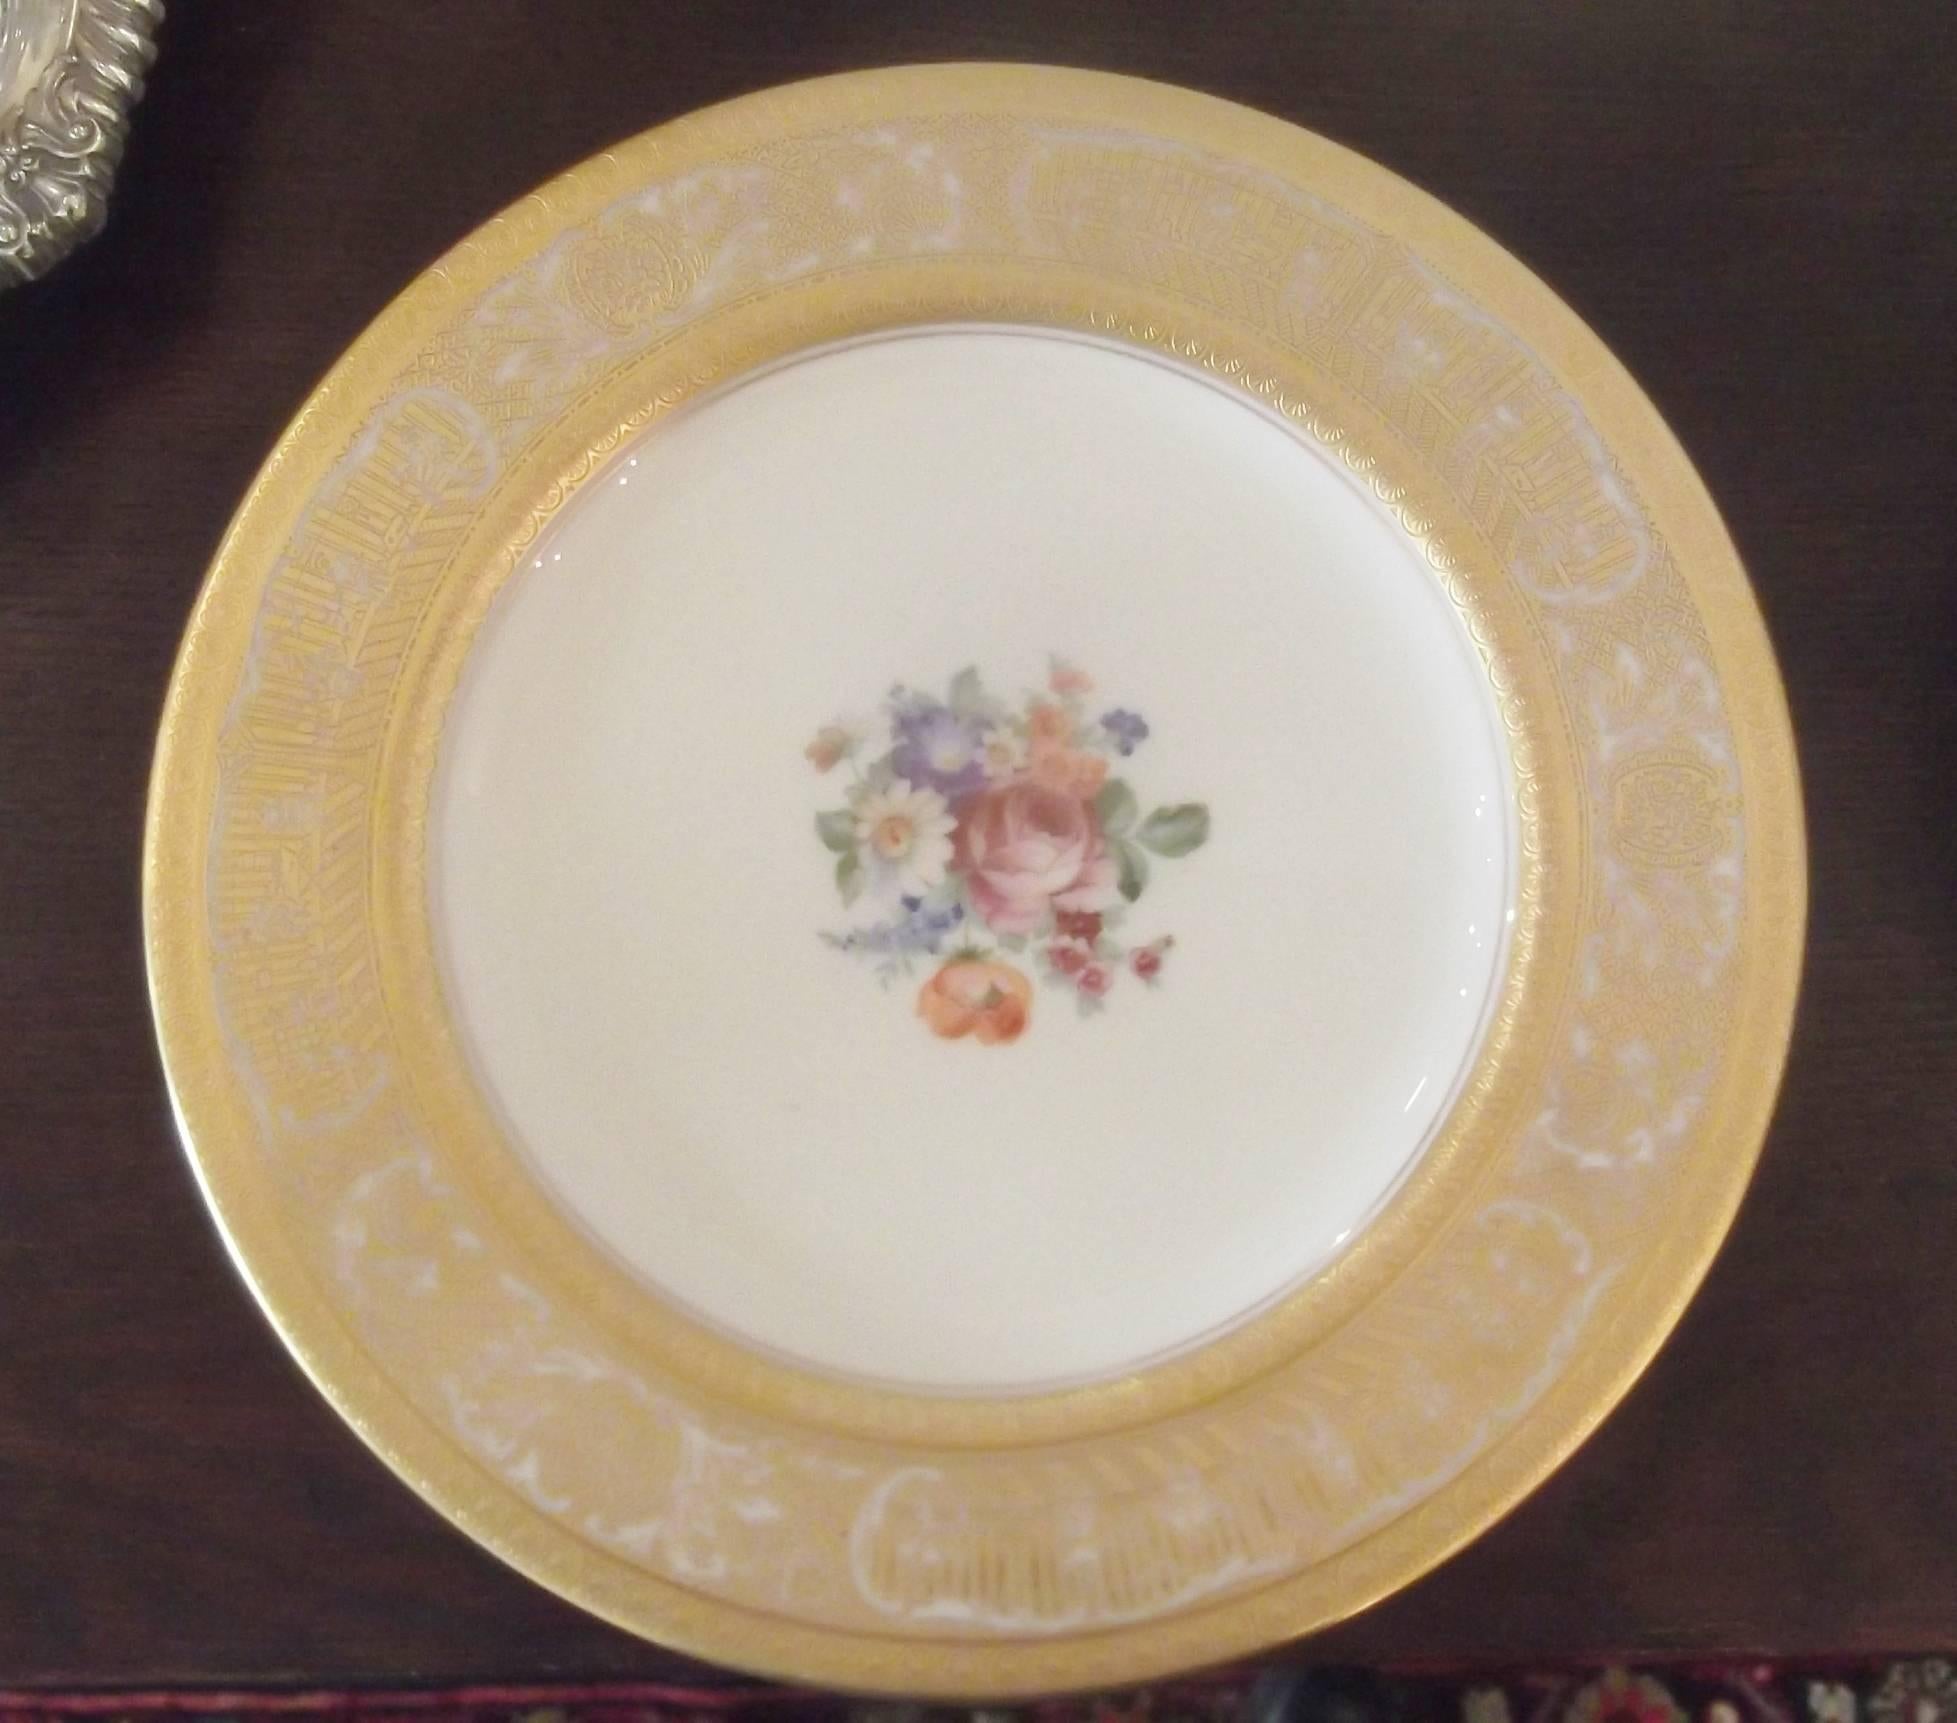 A set of 12 heavy gilt bordered service plates with floral centers.
Textured gilding around the edge with delicate floral bouquet medallions. Excellent condition and would display beautifully in a cabinet or set a luxurious dinner table.